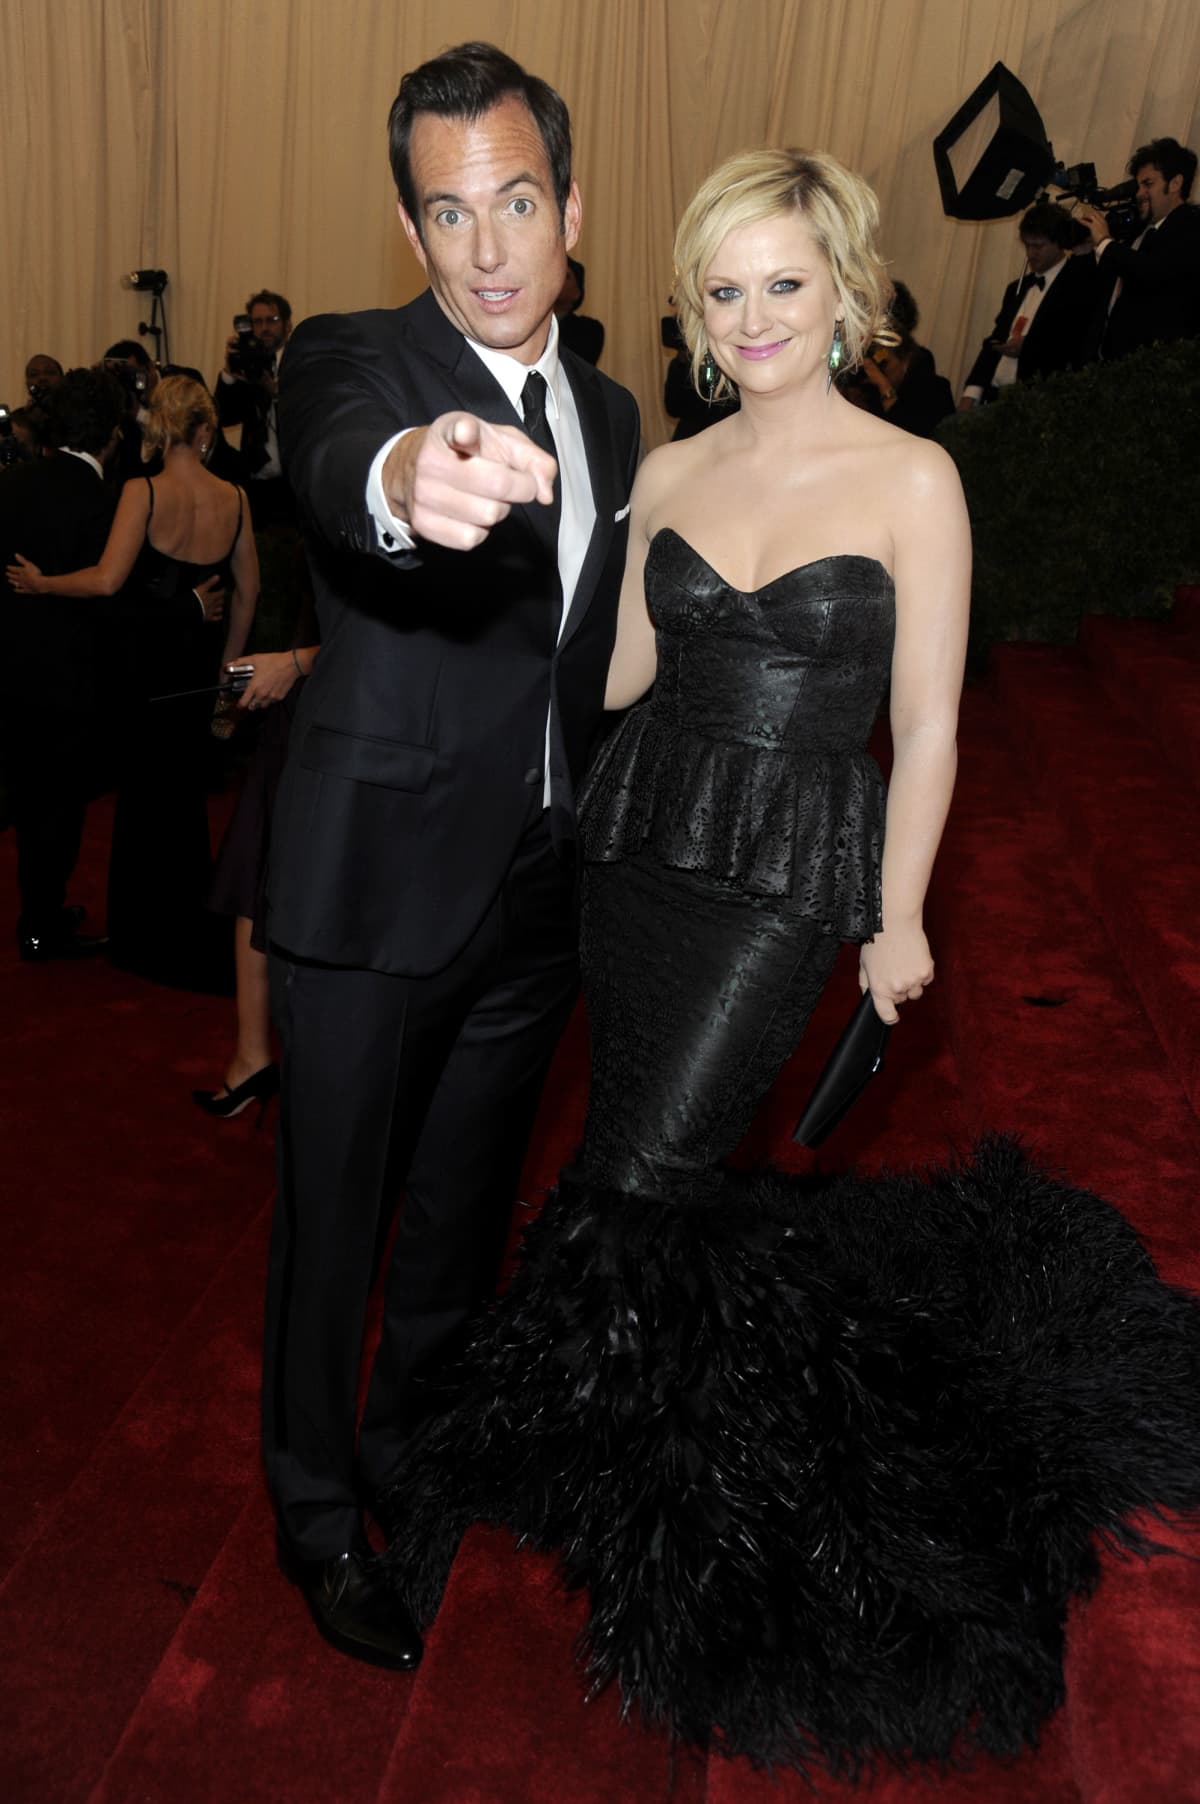 NEW YORK, NY - MAY 07: Will Arnett and Amy Poehler attends the "Schiaparelli And Prada: Impossible Conversations" Costume Institute Gala at the Metropolitan Museum of Art on May 7, 2012 in New York City. (Photo by Rabbani and Solimene Photography/Getty Images)